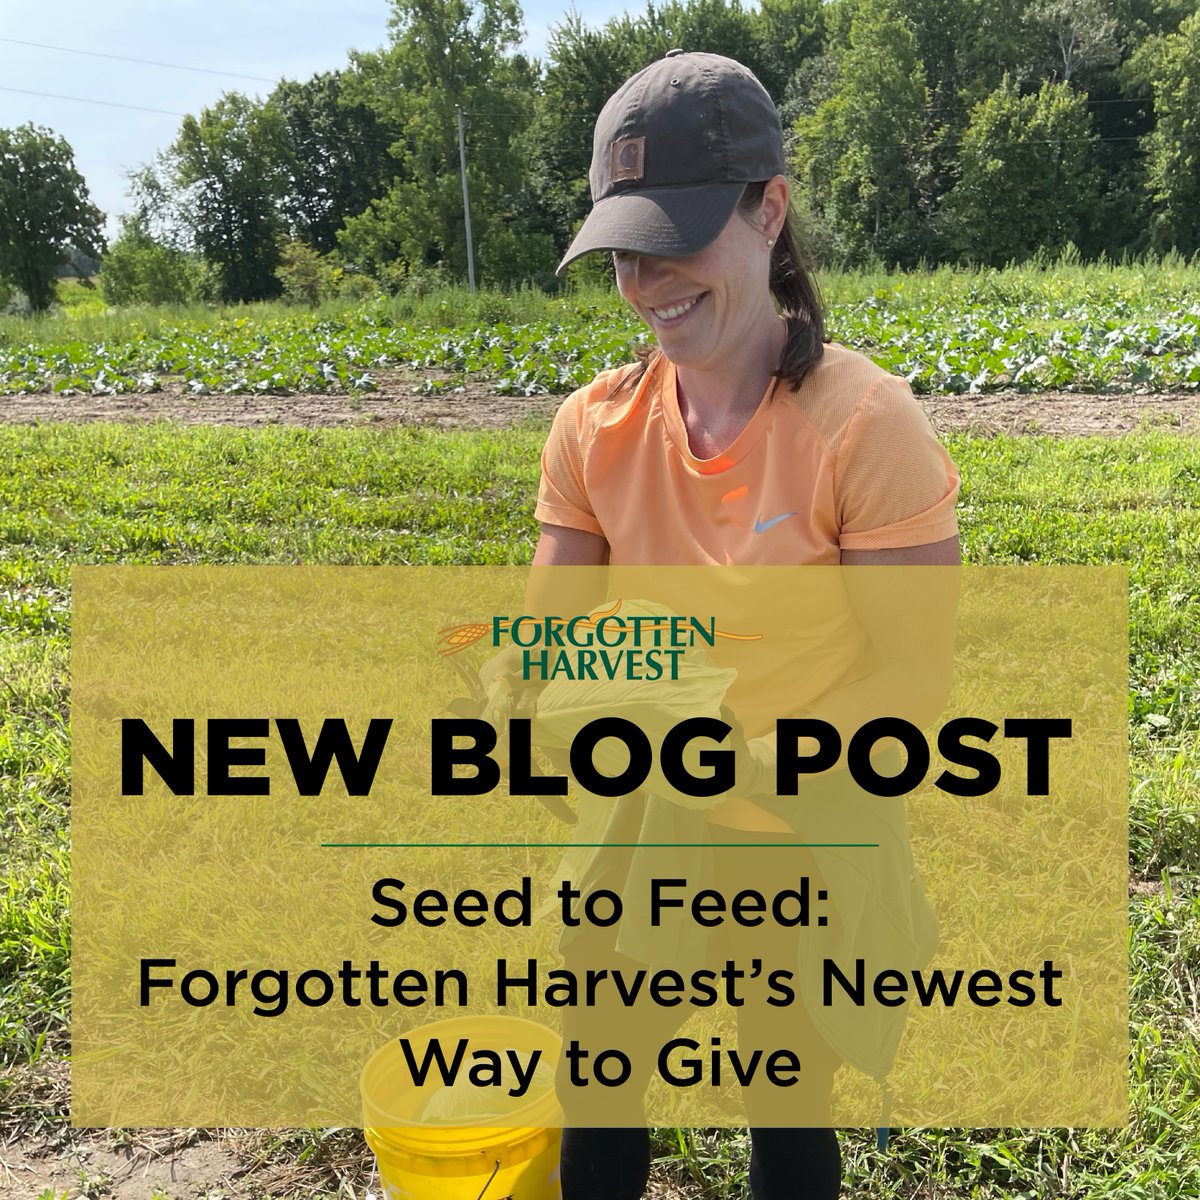 ✨NEW BLOG POST✨ Forgotten Harvest has many ways for you to get involved in the fight against food insecurity. Whether you’re looking to dive in with volunteer work or support our organization with donations, we make it easy to help your community. 👉 bit.ly/4c2UXrU